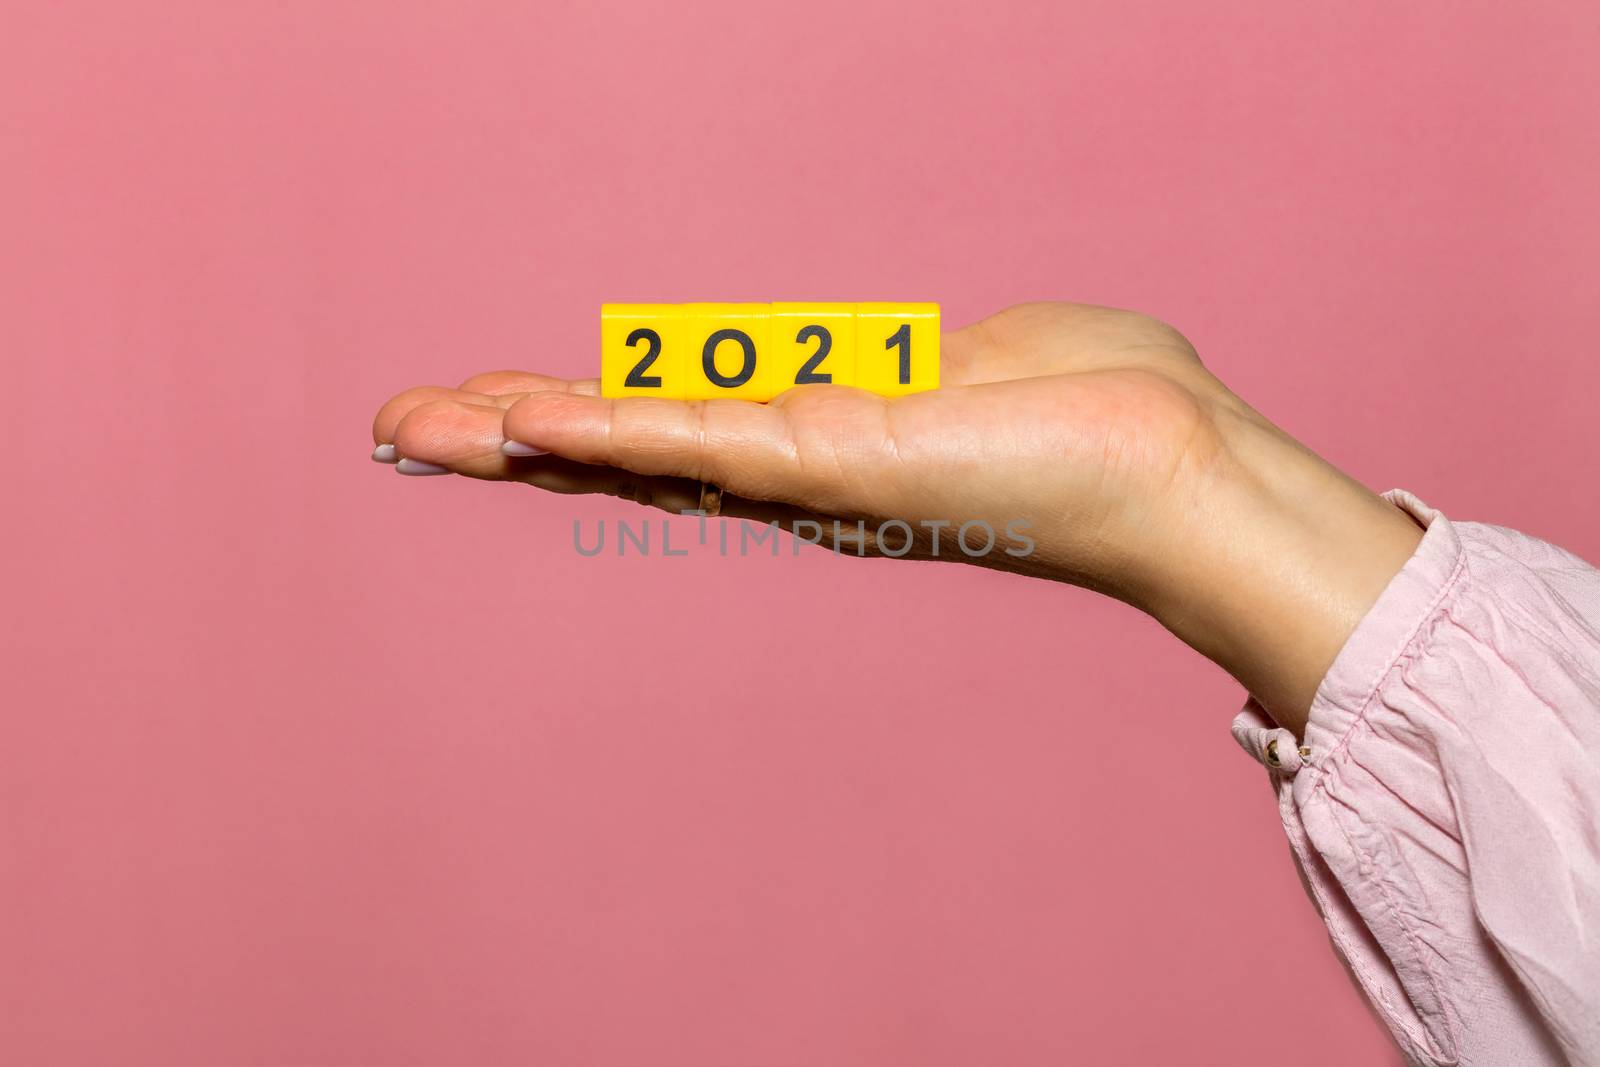 Female hand holding a bunch of yellow cubes with black digits which form 2021. Pink background. Close up shot. Christmas, new years celebration season concept.